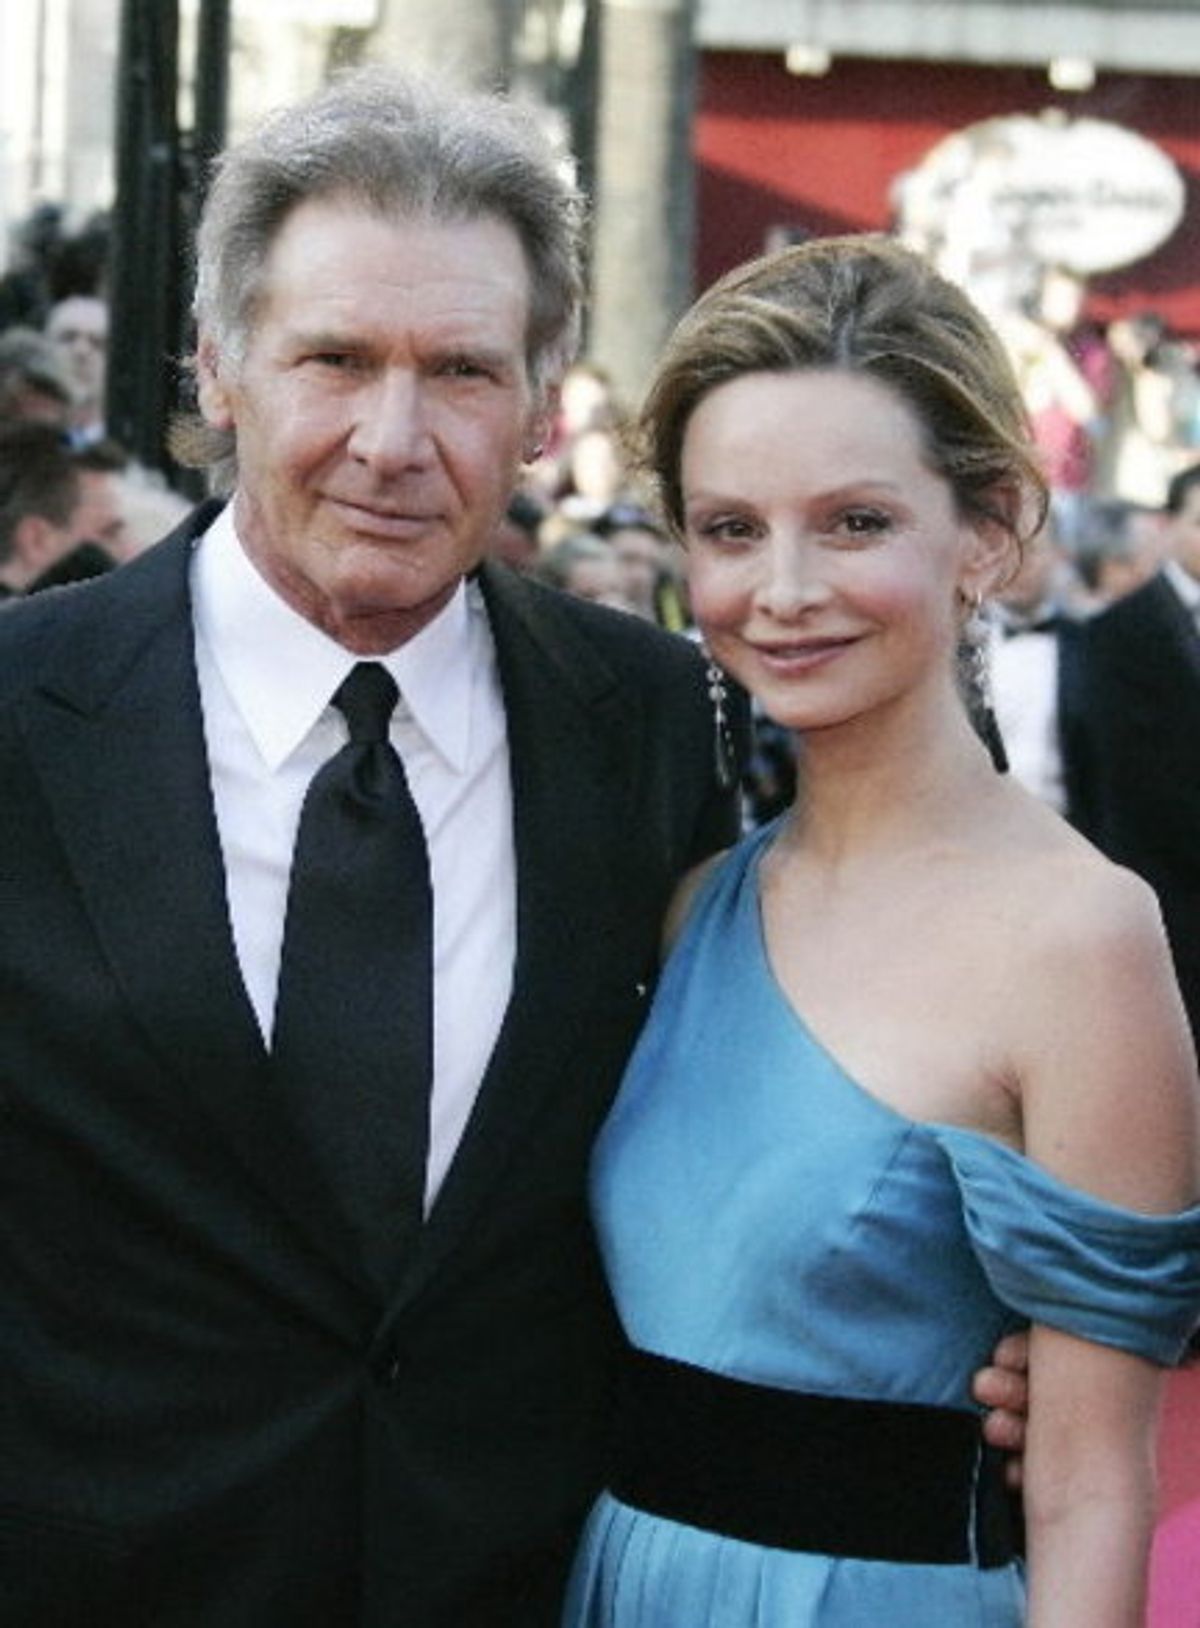 Harrison Ford and Calista Flockhart  